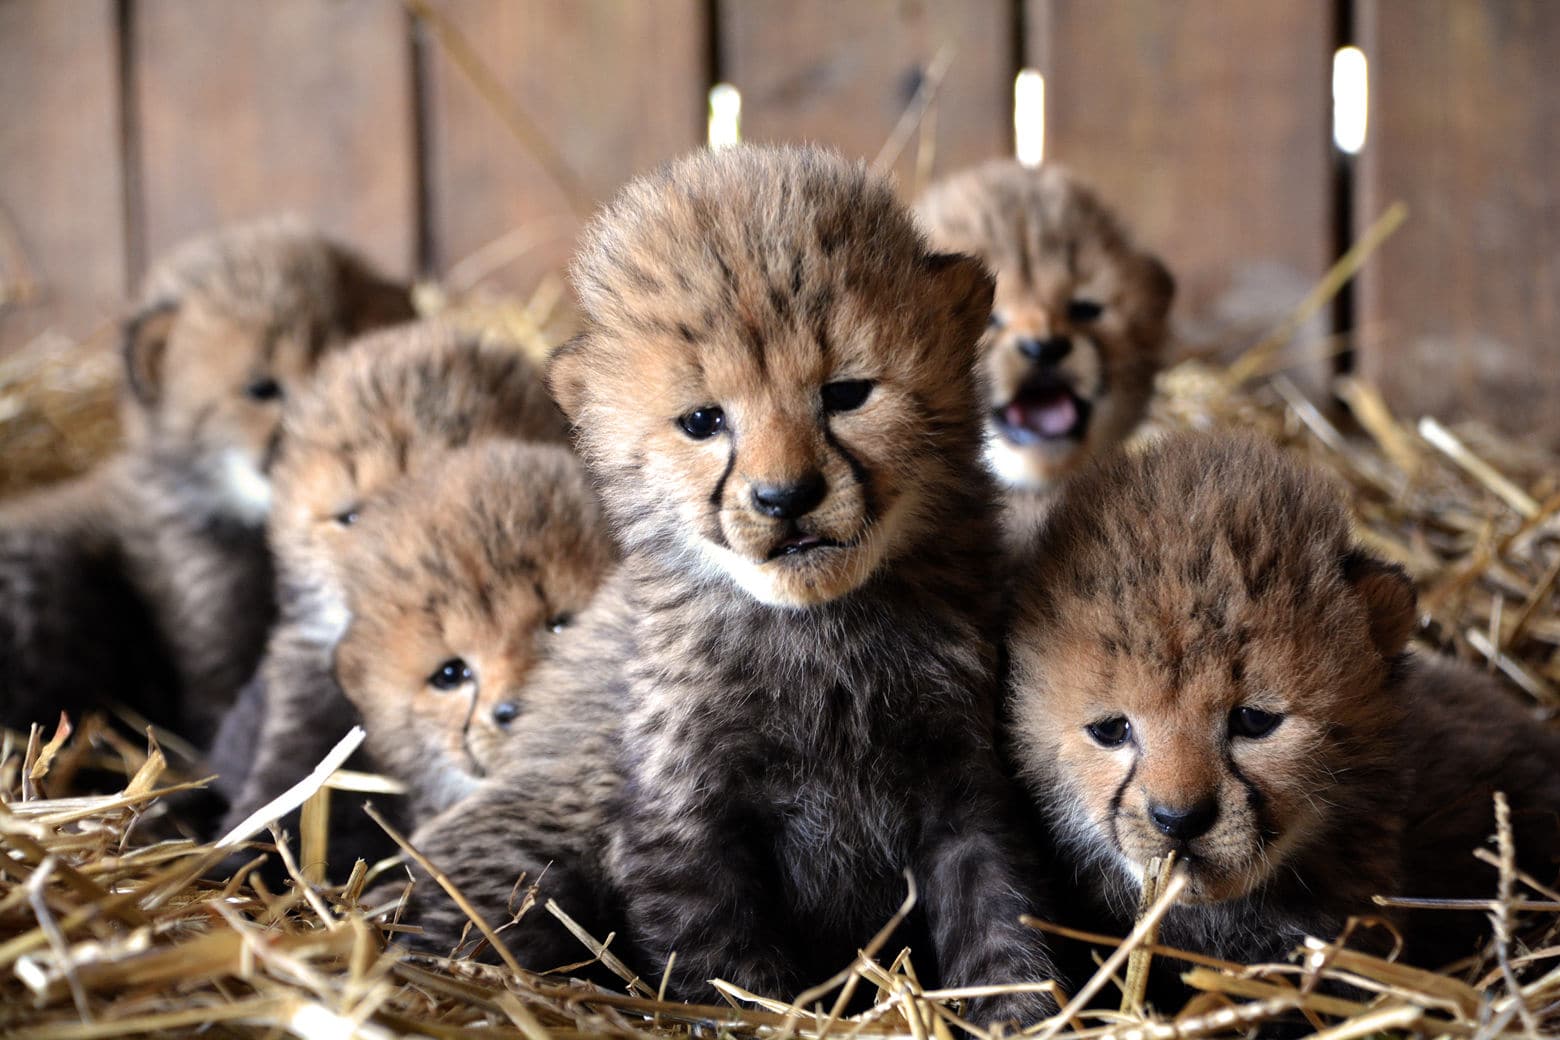 "This is a very special birth to us, because not only is it a big boost to the captive population but a cheetah having seven cubs only happens 1 percent of the time," a zookeeper says. (Courtesy Richmond Metro Zoo)